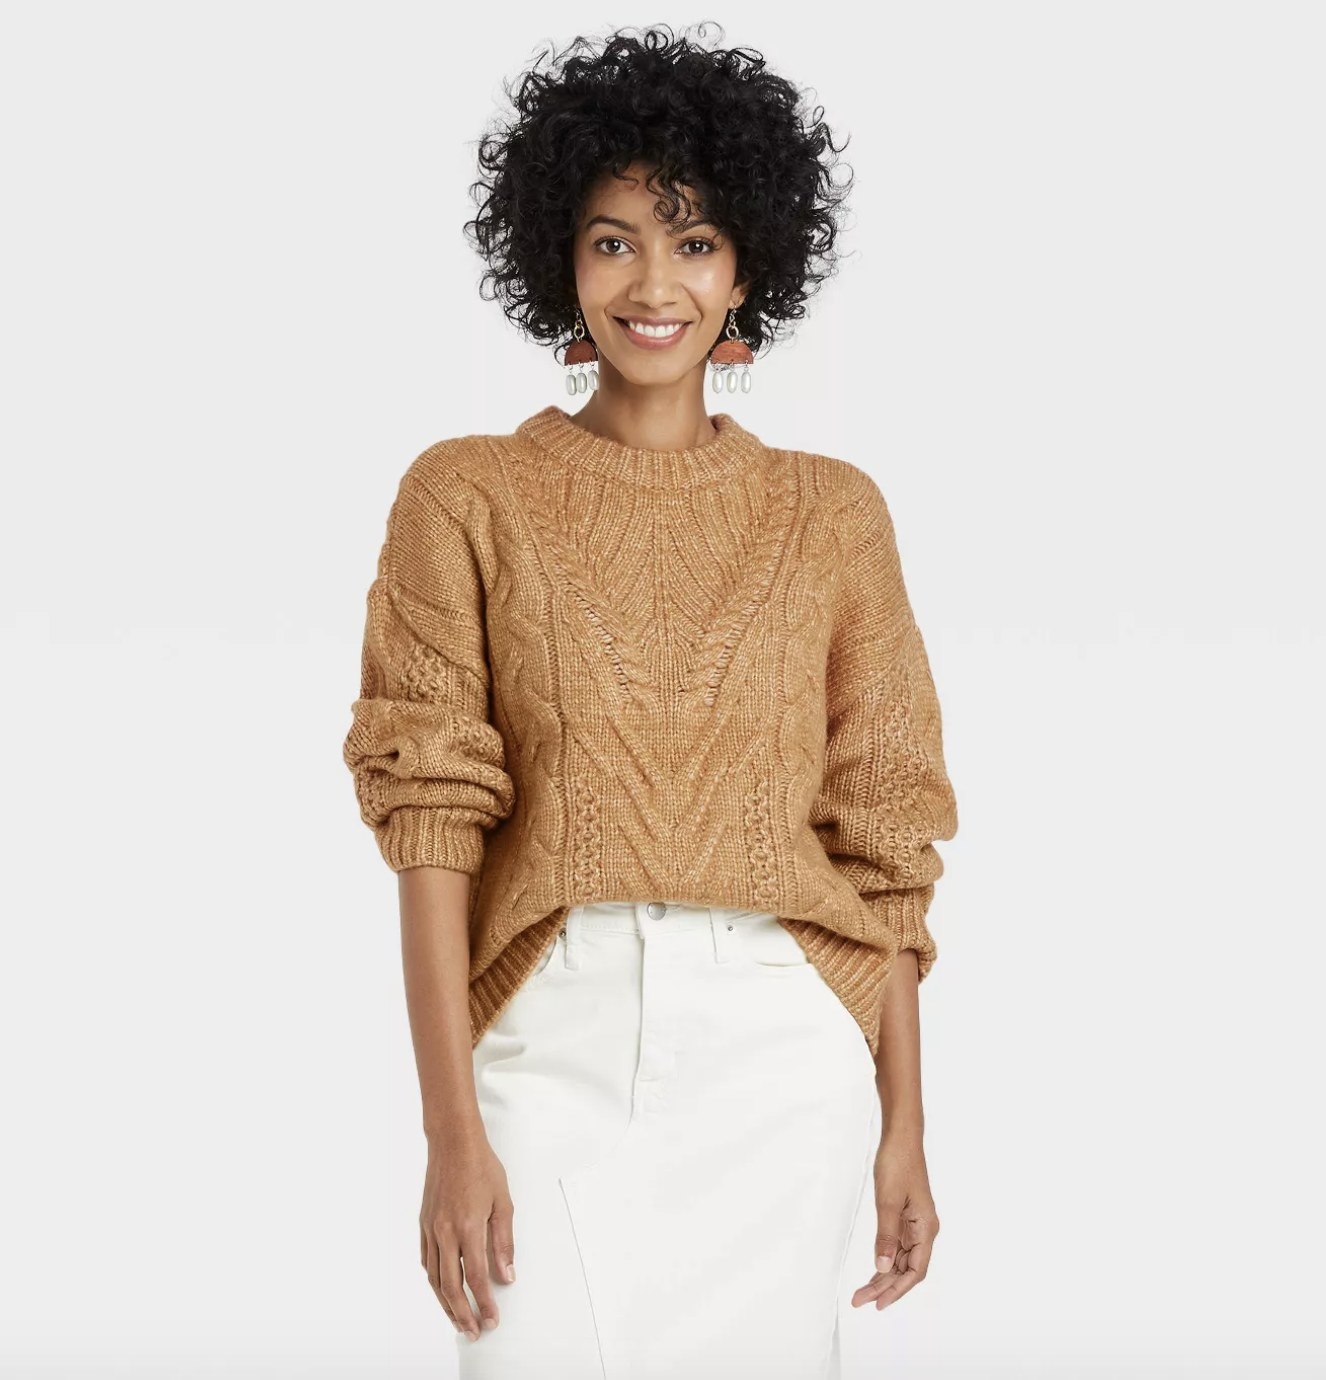 An adult wears the rust-colored sweater with cable knit prints